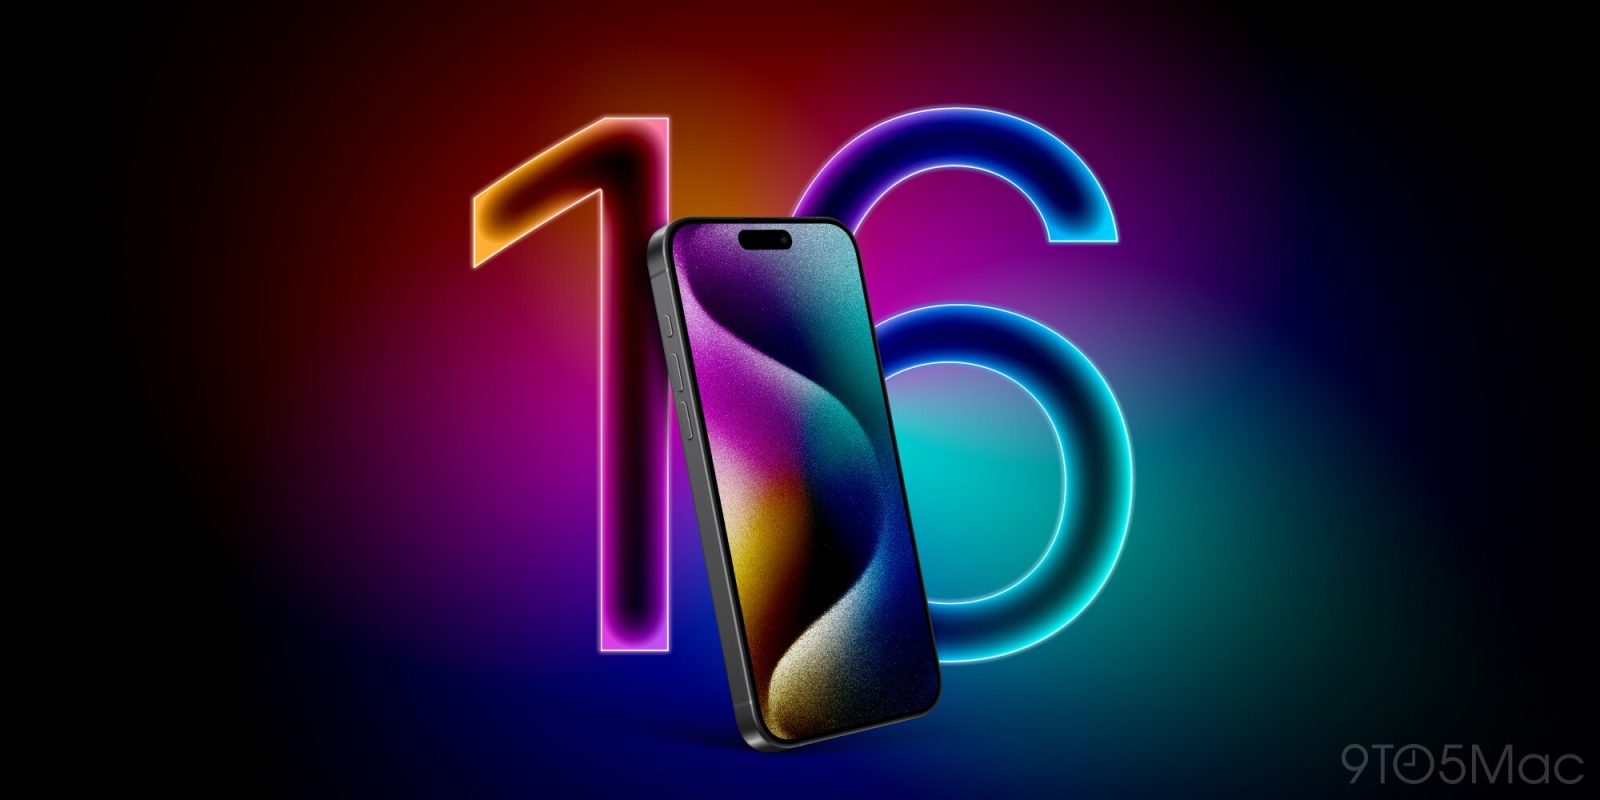 iPhone 16 Pro to launch with groundbreaking camera upgrades in 2022